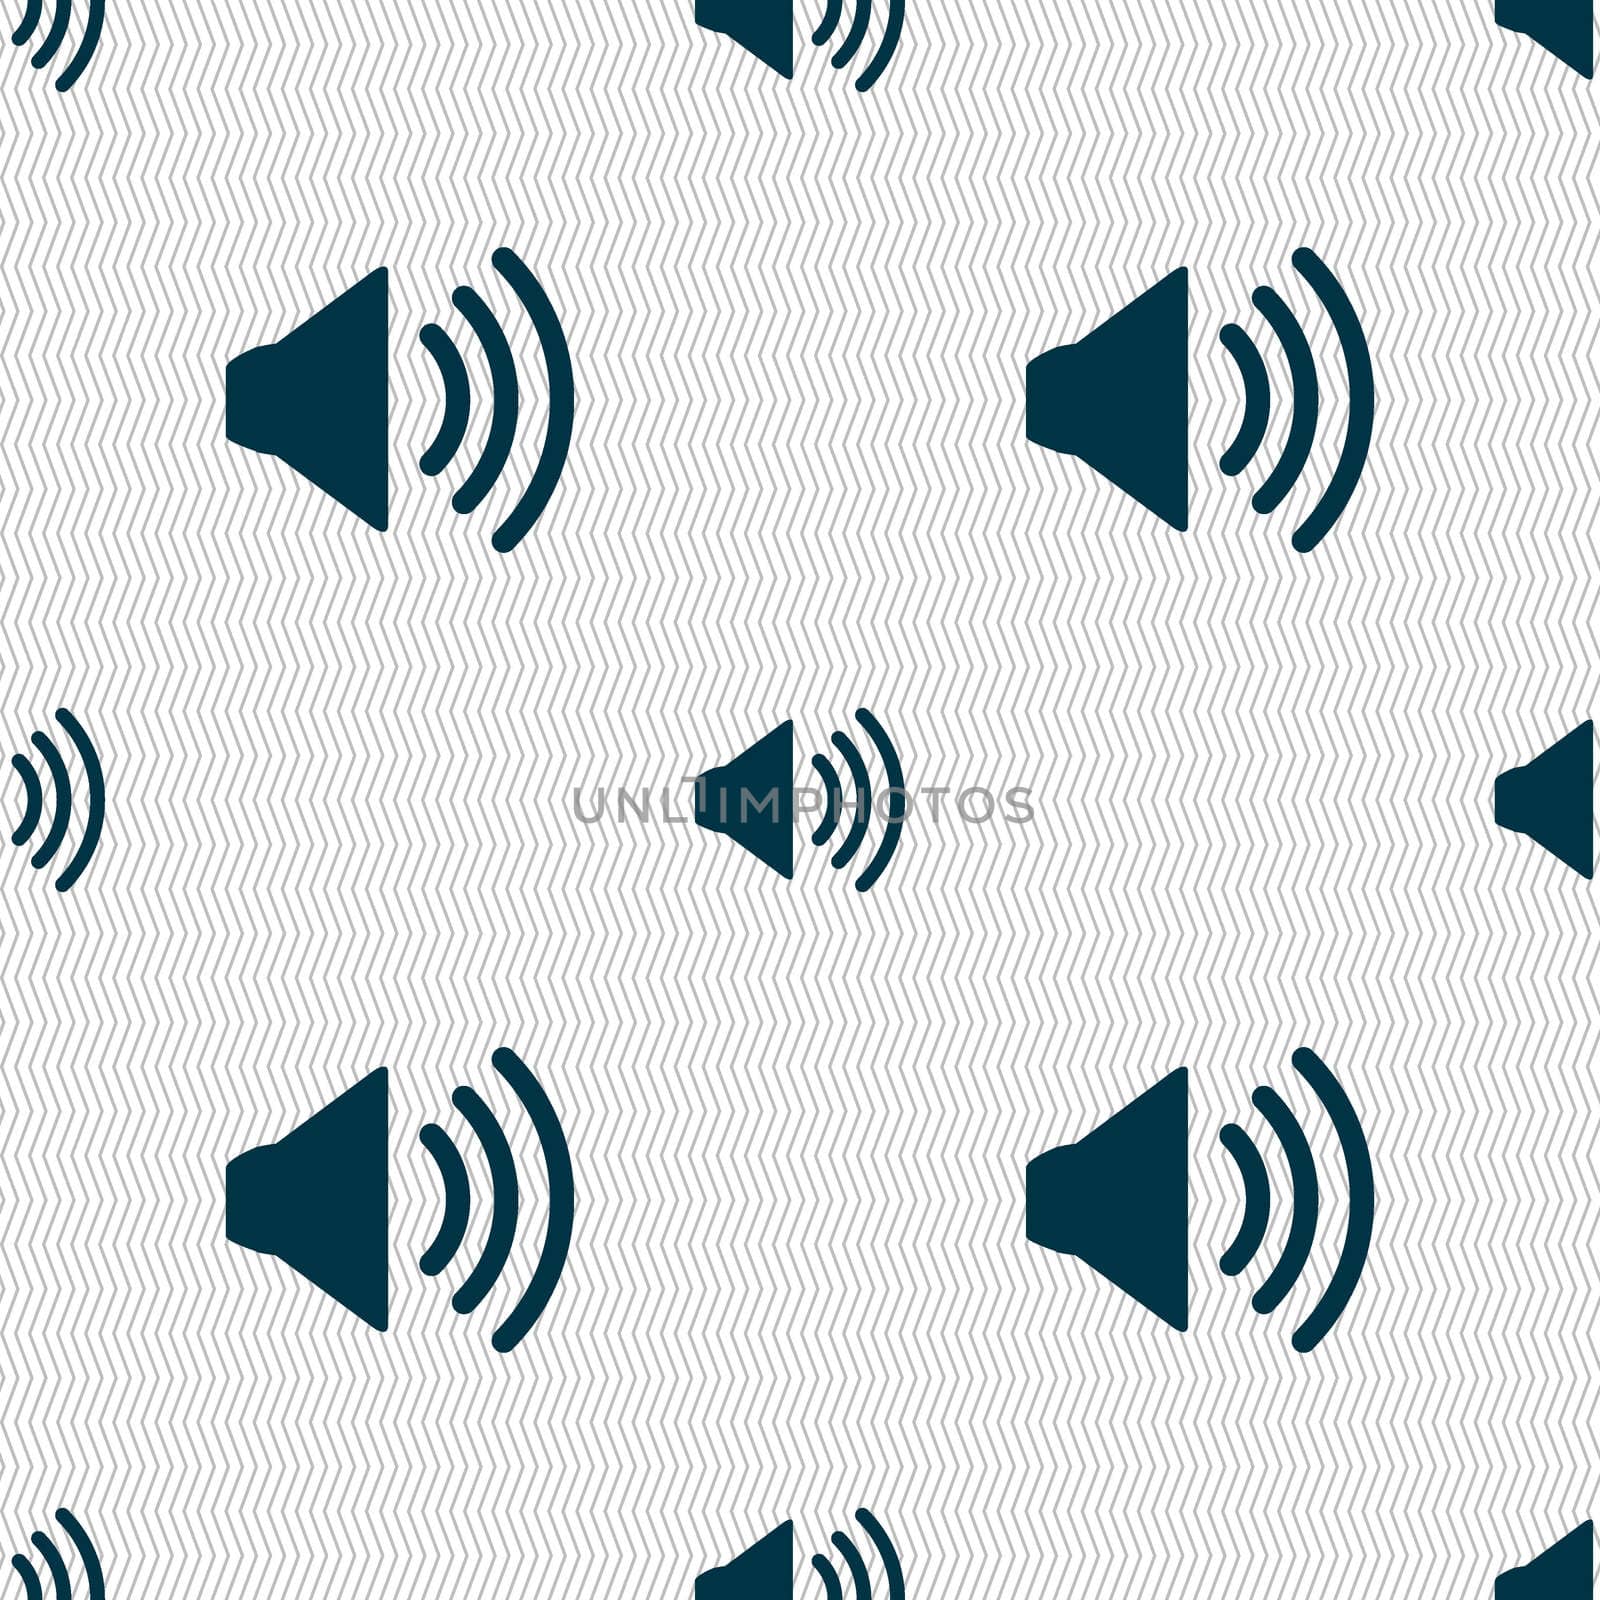 Speaker volume sign icon. Sound symbol. Seamless abstract background with geometric shapes. illustration